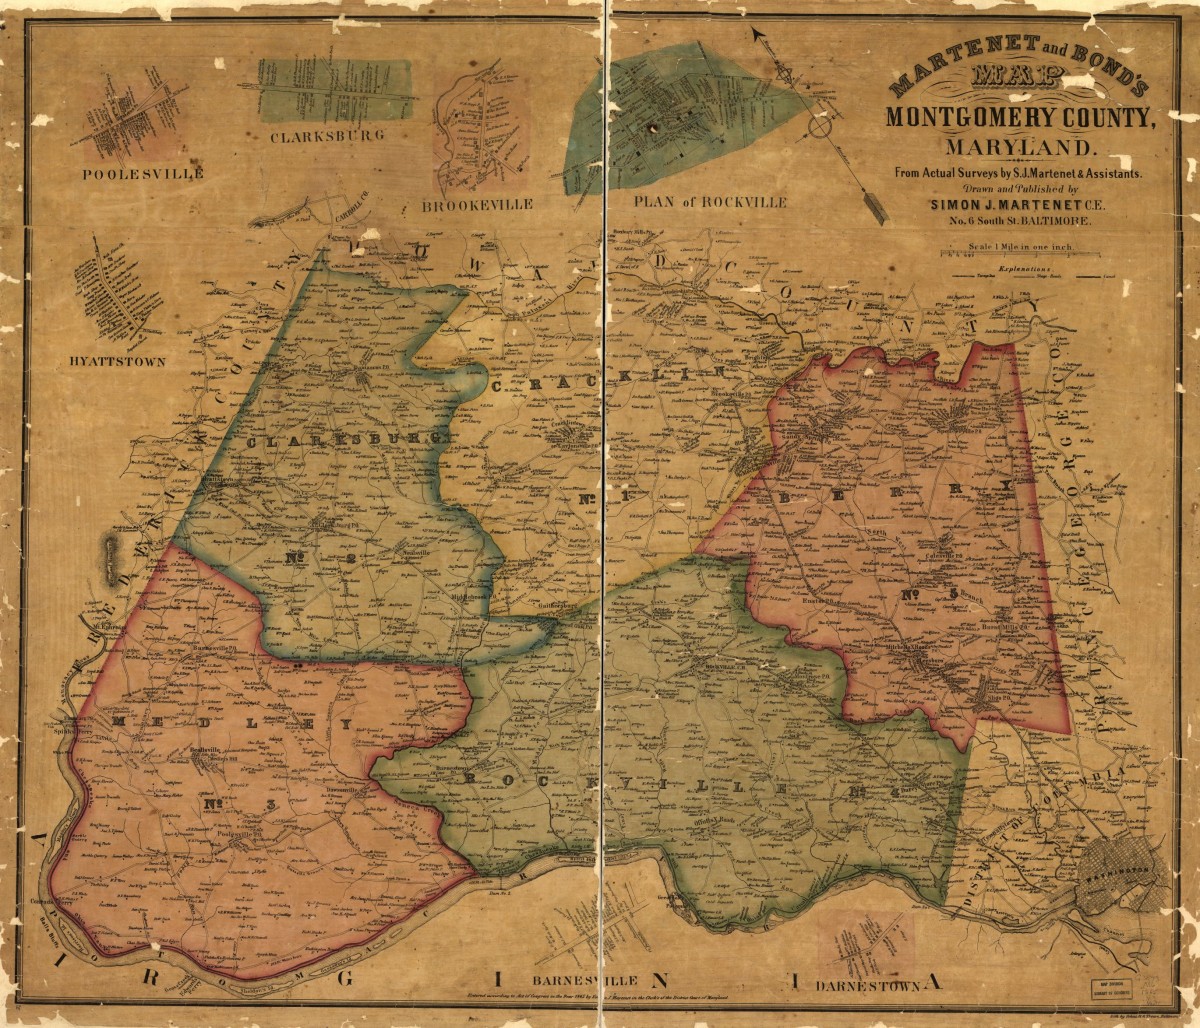 How different parts of Montgomery County used to be divided and named